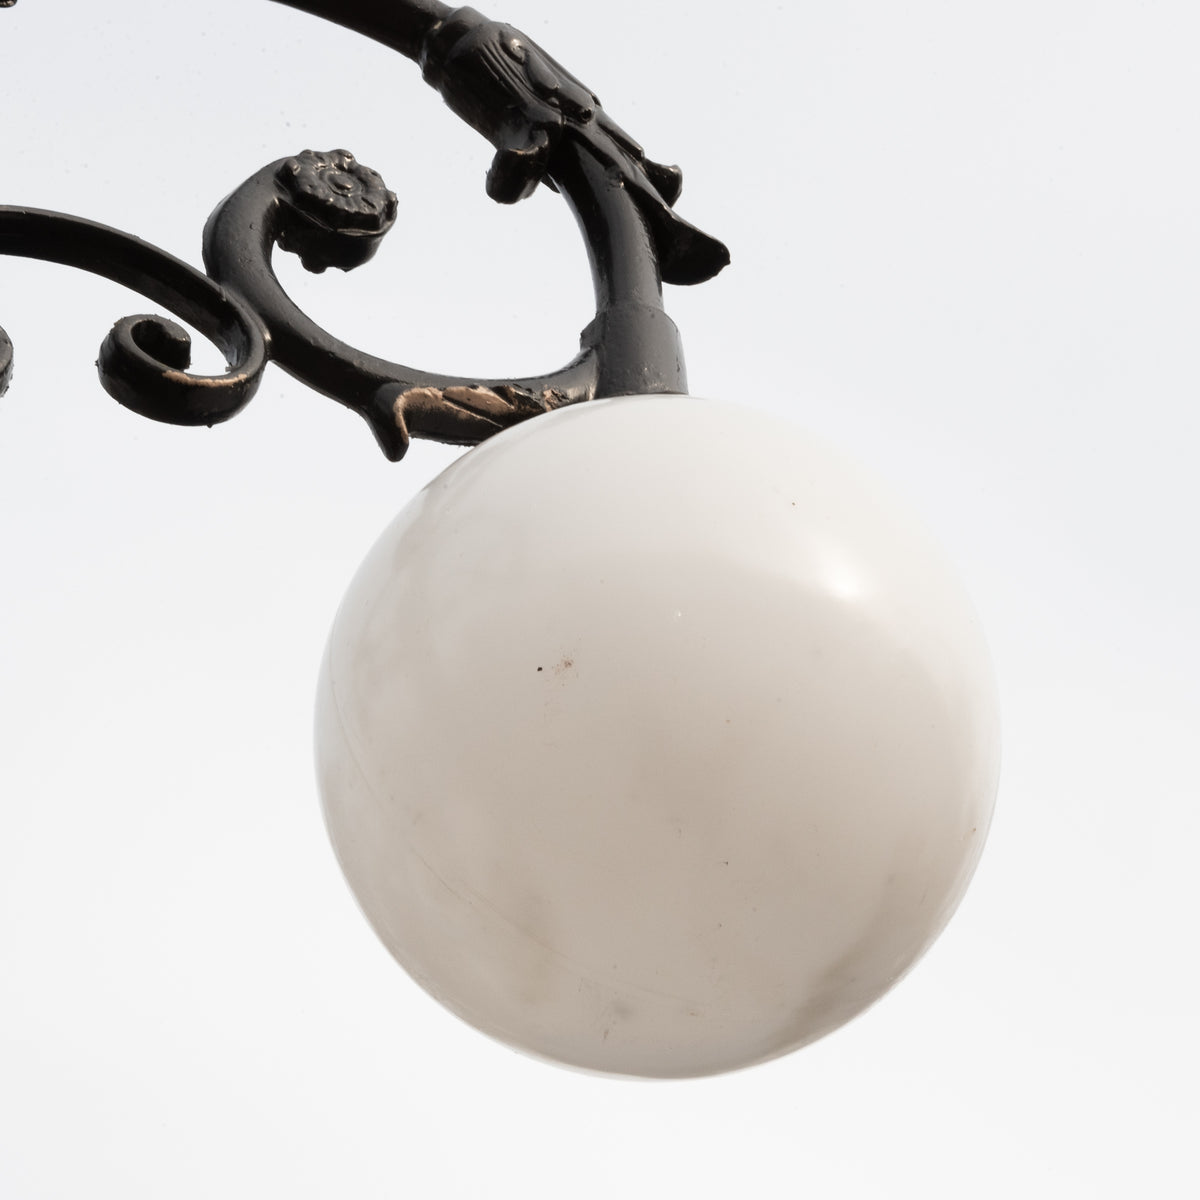 Reclaimed Globe Lamppost | Ornate Victorian Street Light (3 Available) | The Architectural Forum